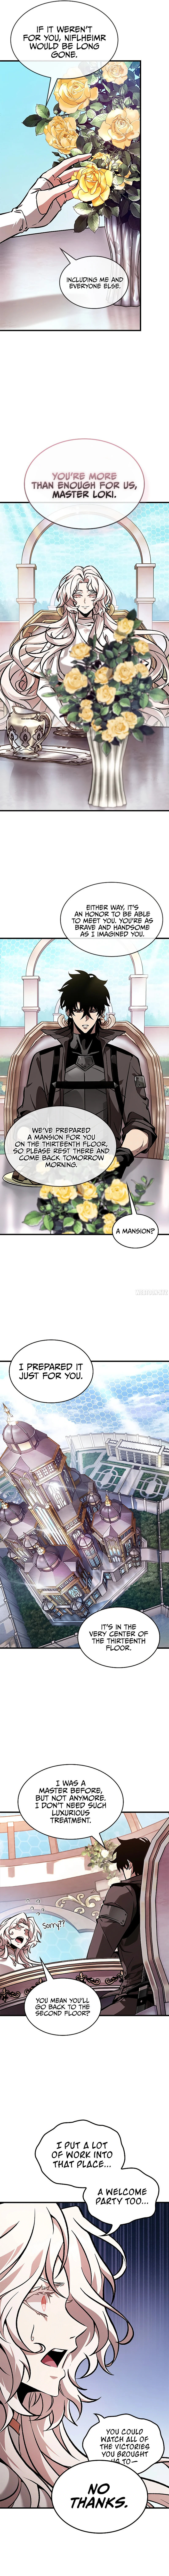 Pick Me Up - Chapter 82 Page 11